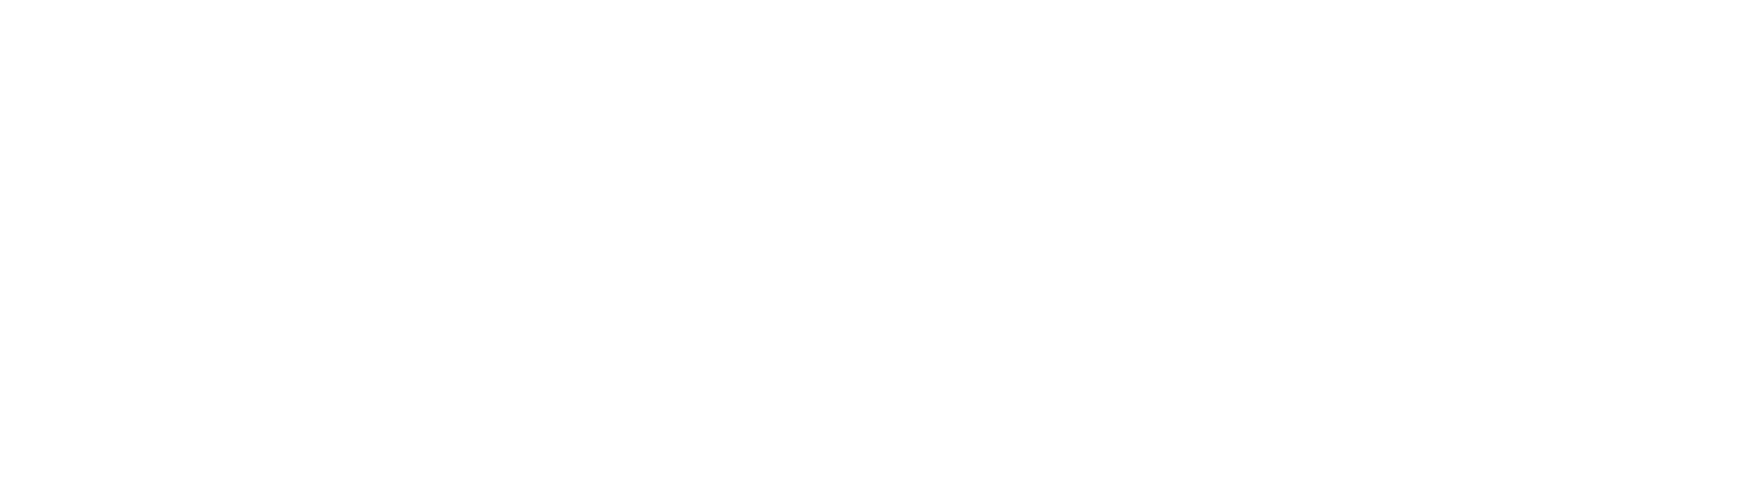 Life Matters Hypnotherapy and Life Coaching